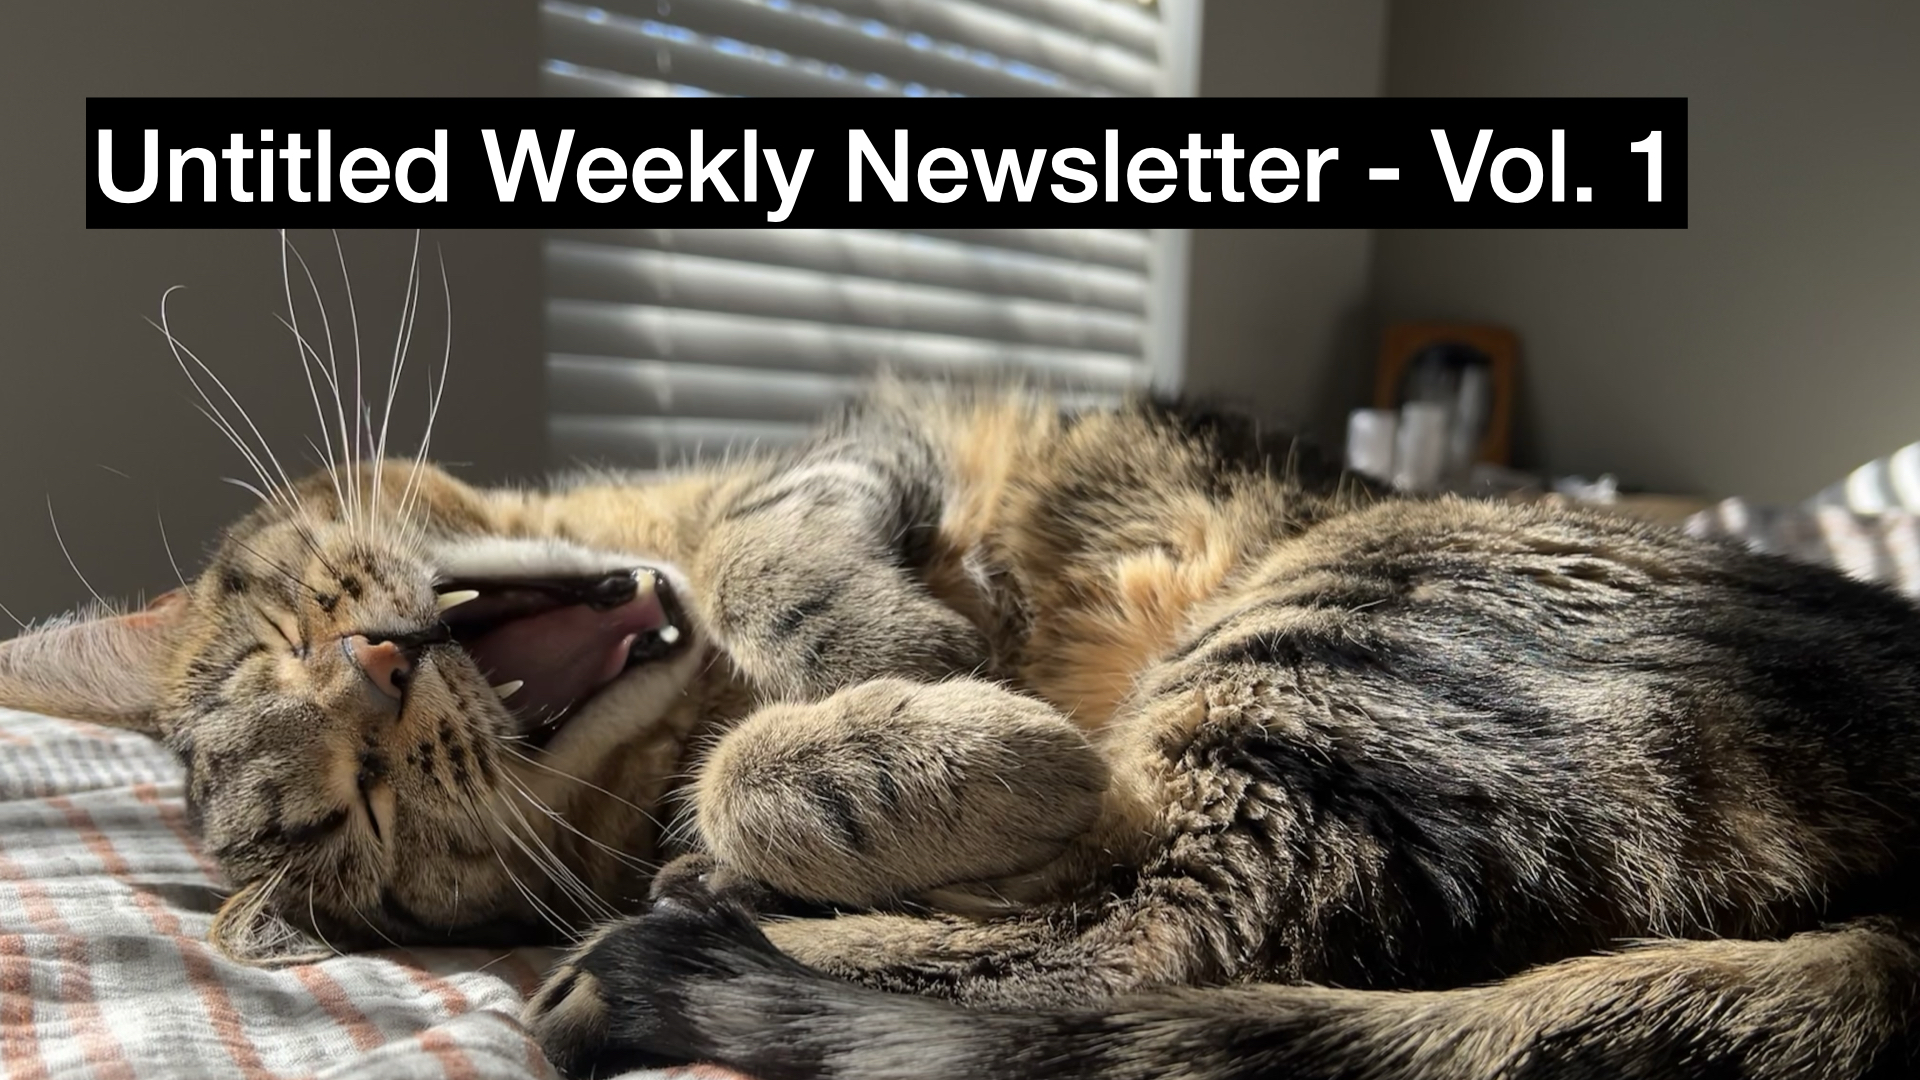 a picture of a shorthair brown tabby laying on its side on a bed and yawning with overlaid text that says "Untitled Weekly Newsletter Volume 1"